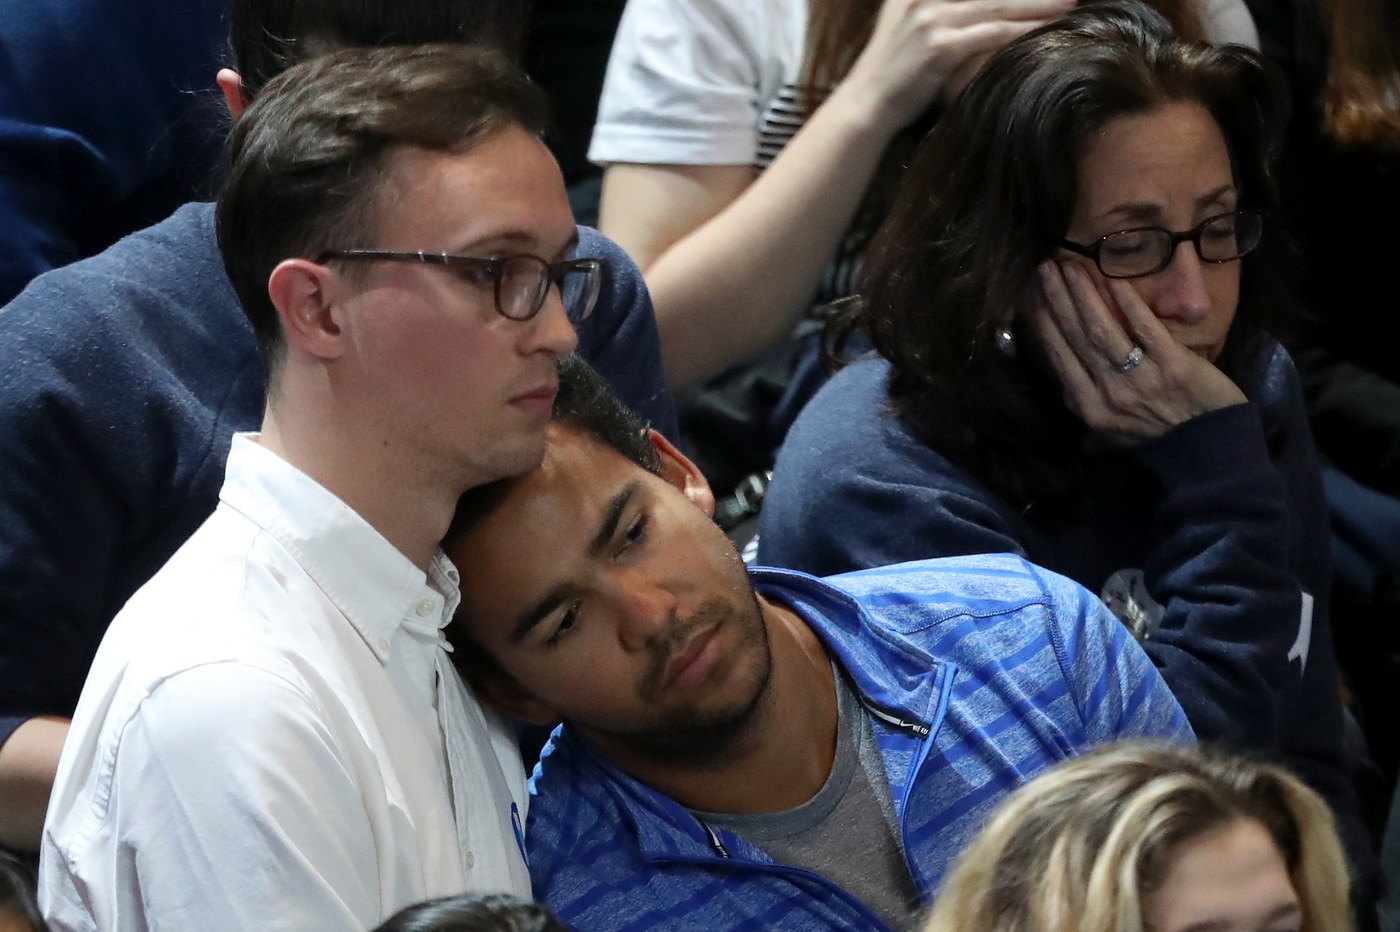 19 Photos Of Clinton Vs Trump Supporters The Moment They Knew Who Won